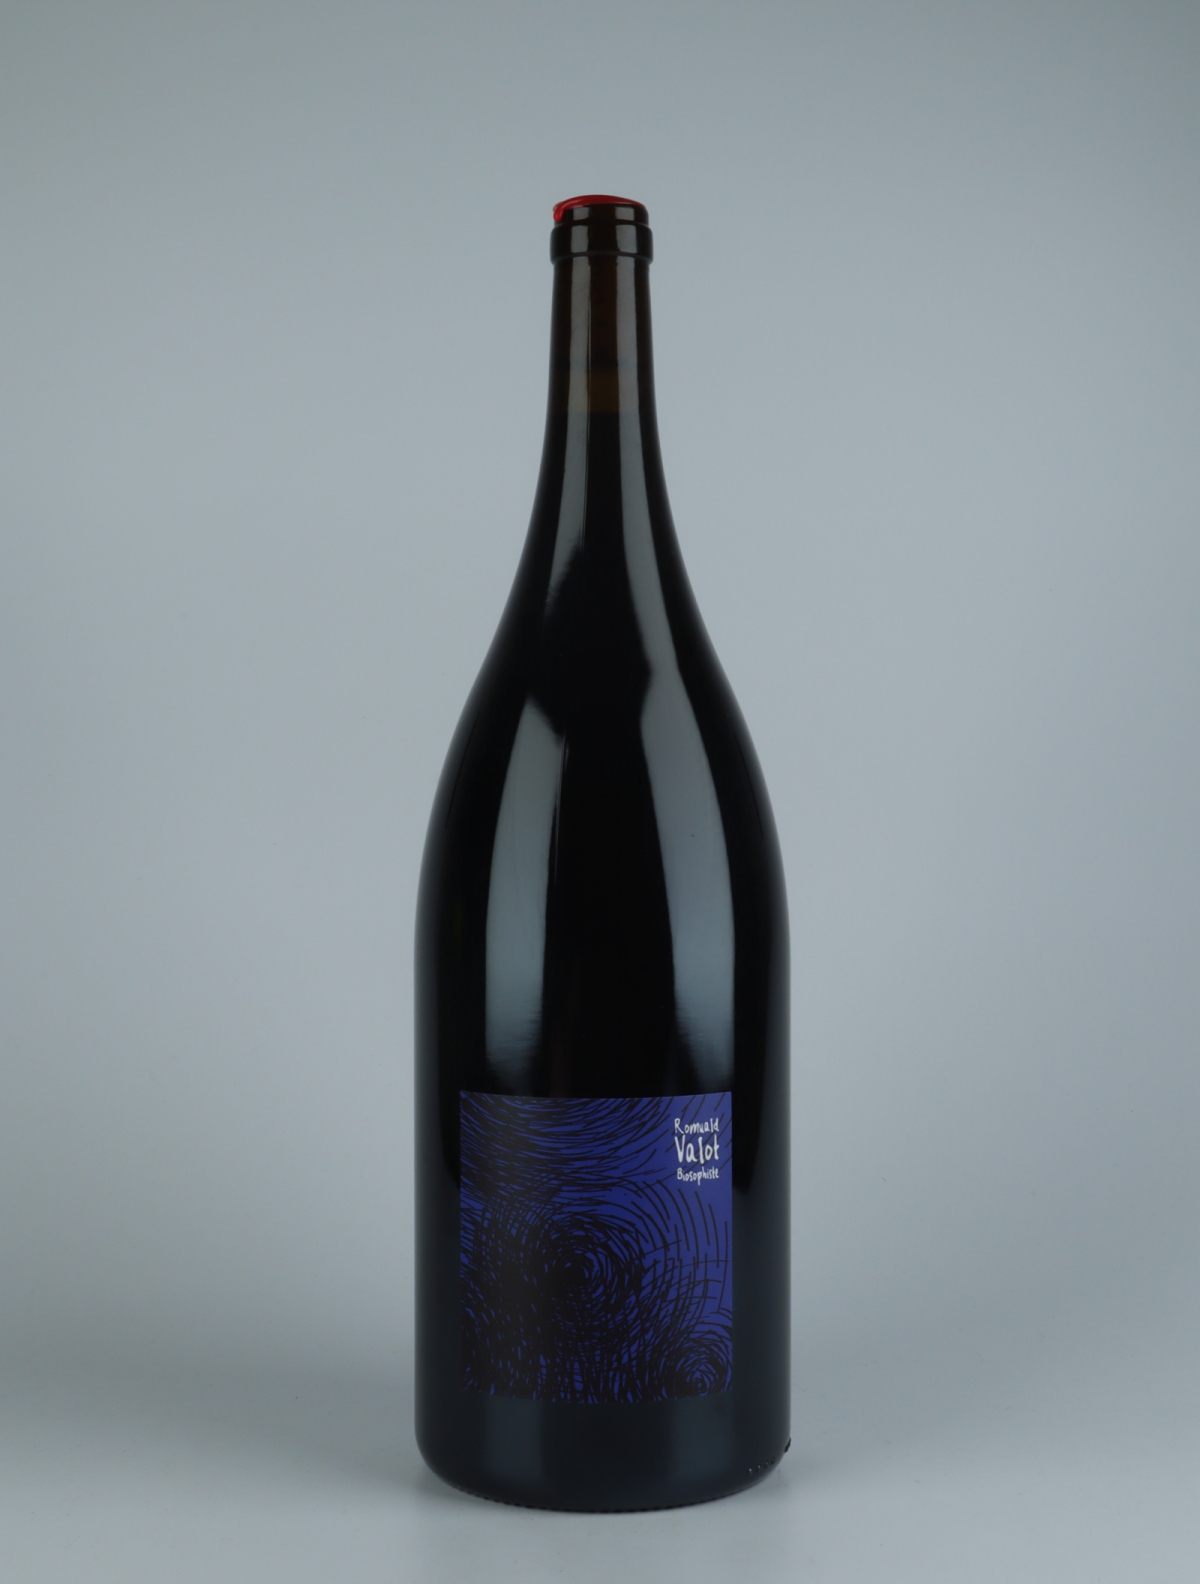 A bottle 2020 Côte de Brouilly Red wine from Romuald Valot, Beaujolais in France